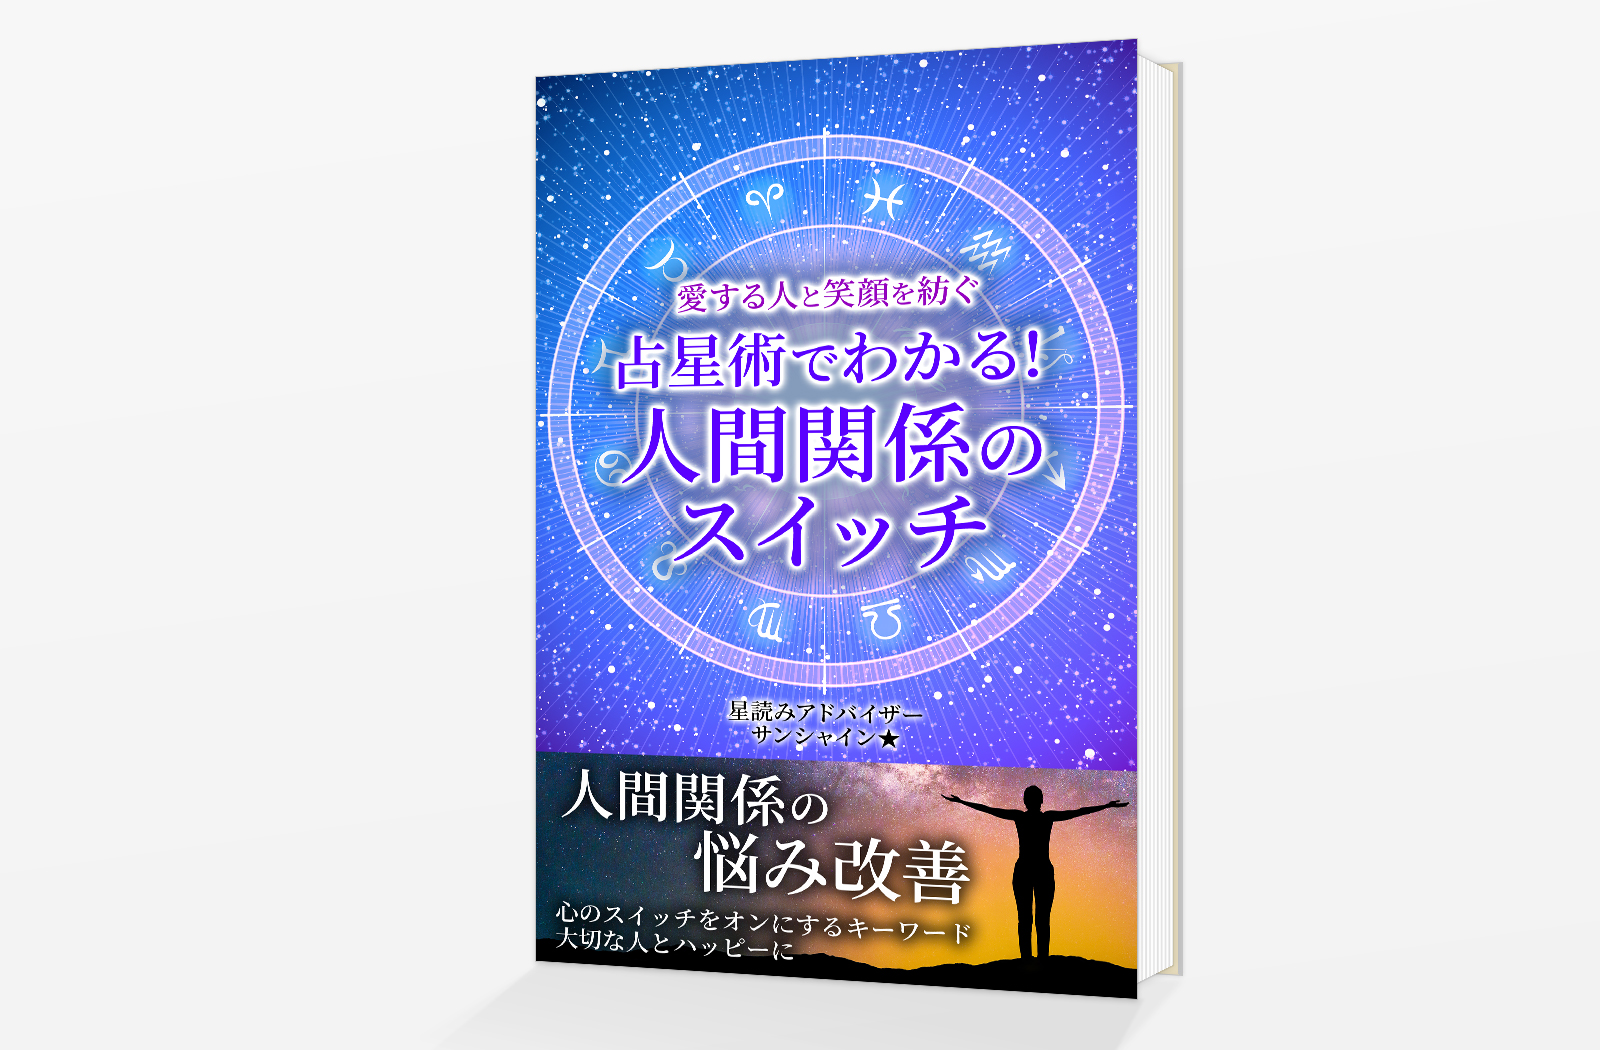 Kindle電子書籍「愛する人と笑顔を紡ぐ　占星術でわかる！人間関係のスイッチ」の表紙デザイン